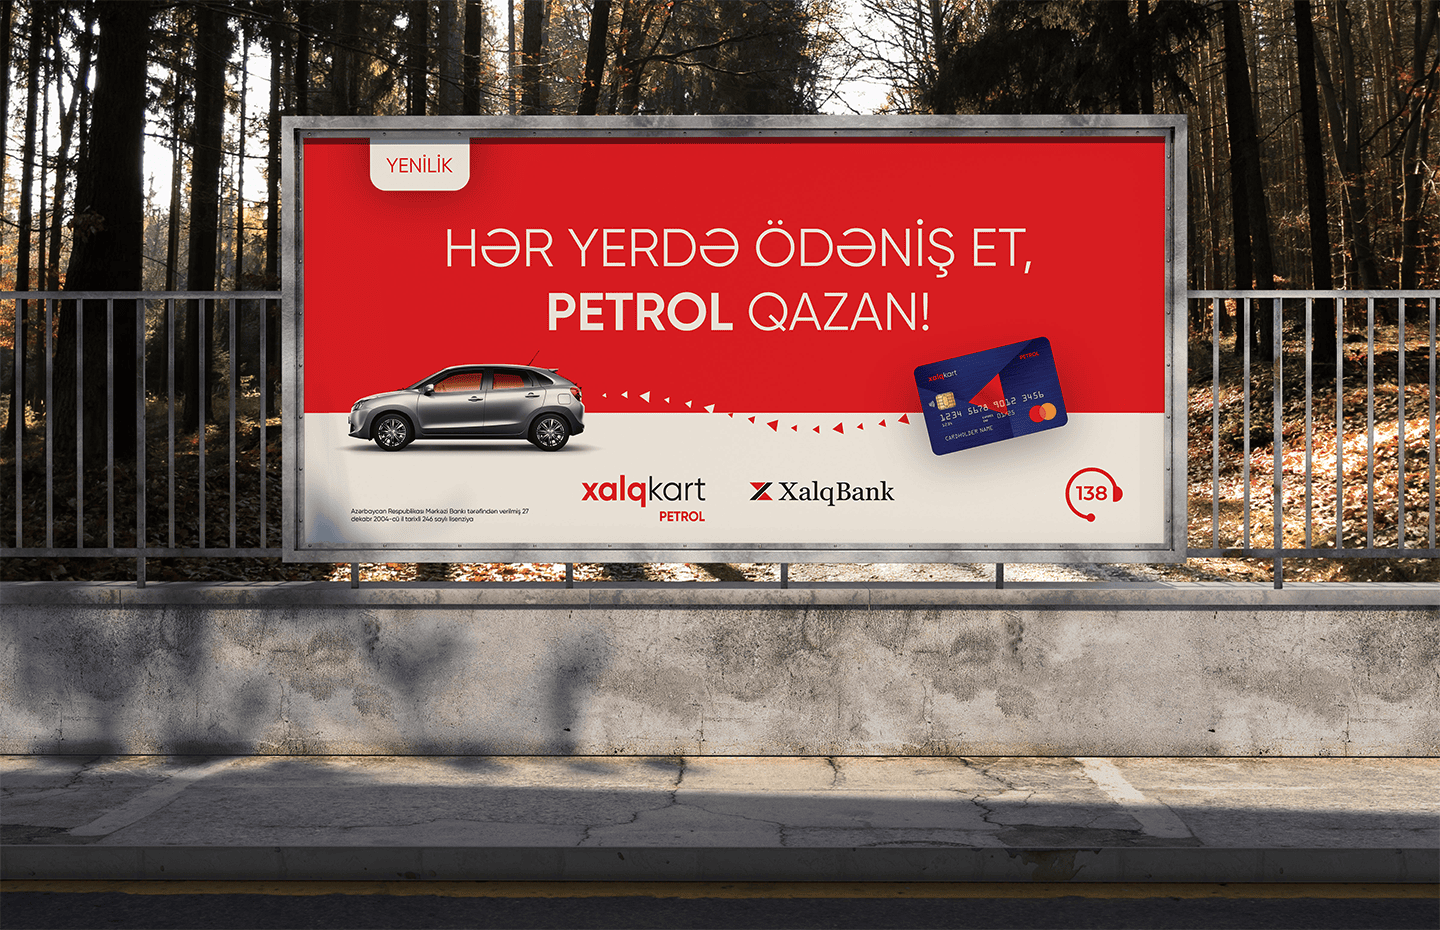 Design for XalqKart Petrol and billboard campaign  5.png